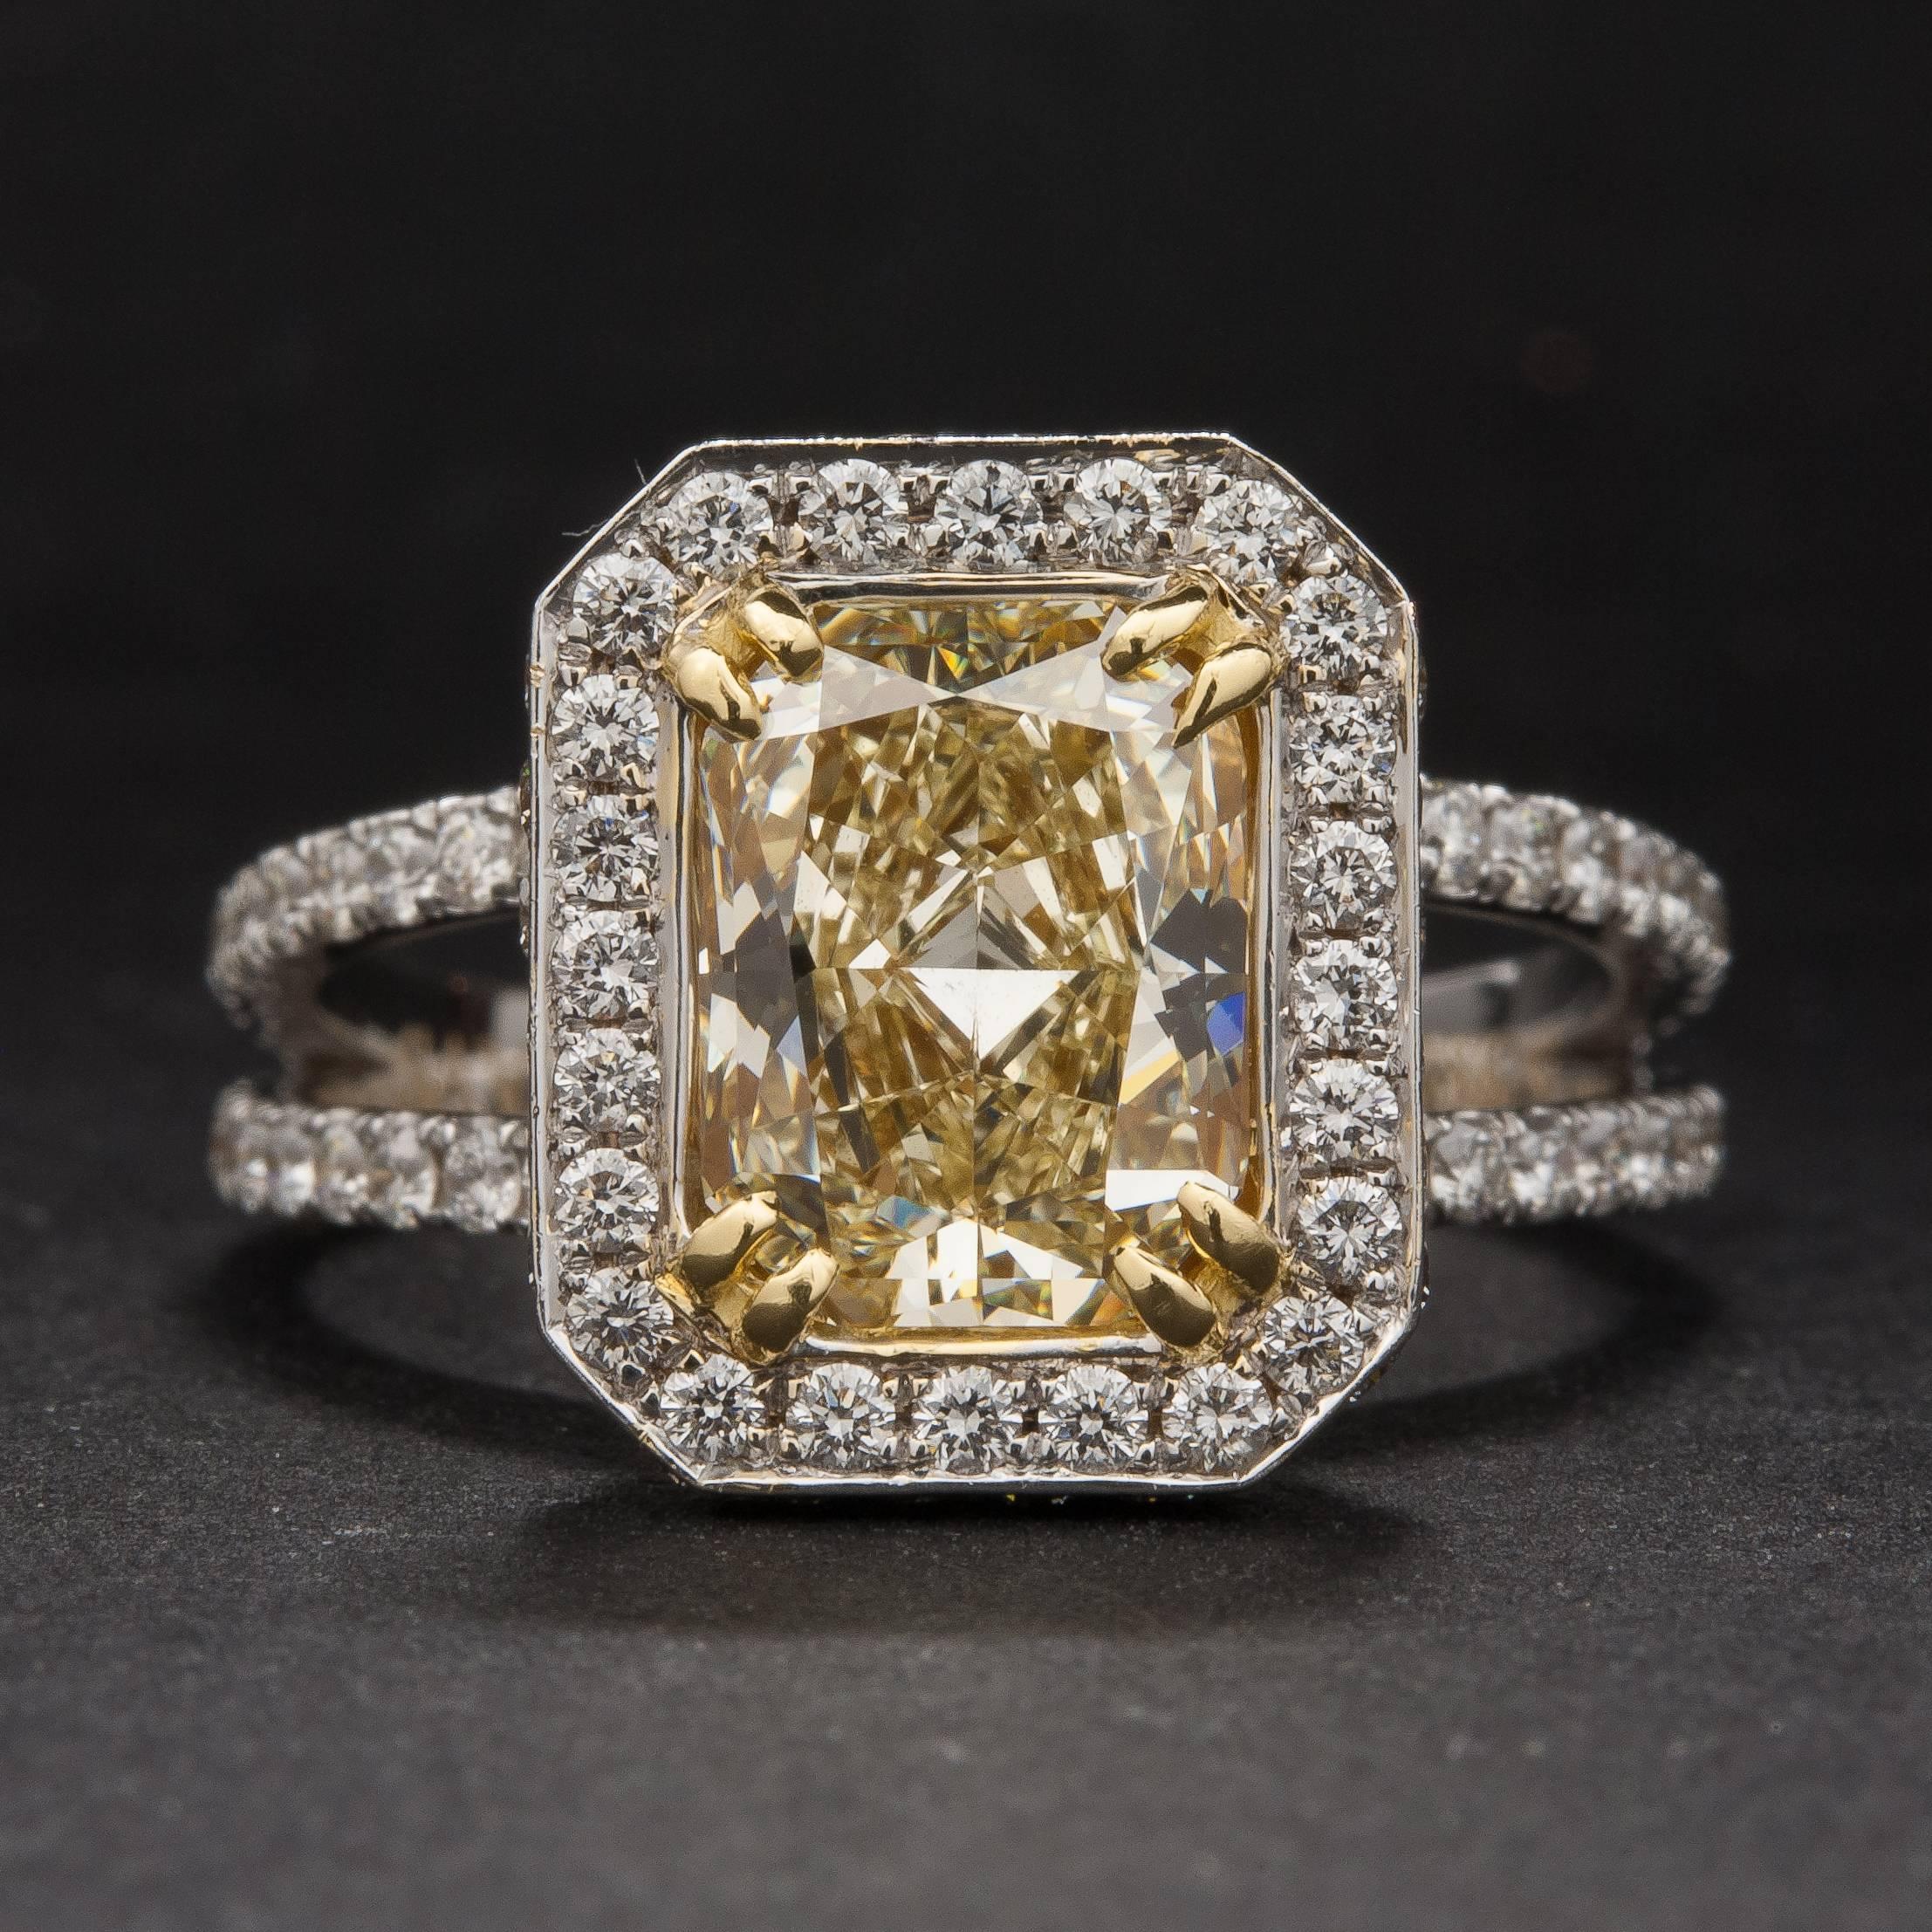 This extraordinary ring features a 2.02 carat radiant cut fancy yellow diamond (VS1 clarity) that is surrounded by 1.20 total carats of bright white diamonds. The beautiful split-shank mounting is crafted in 18k white gold and is currently size 7.